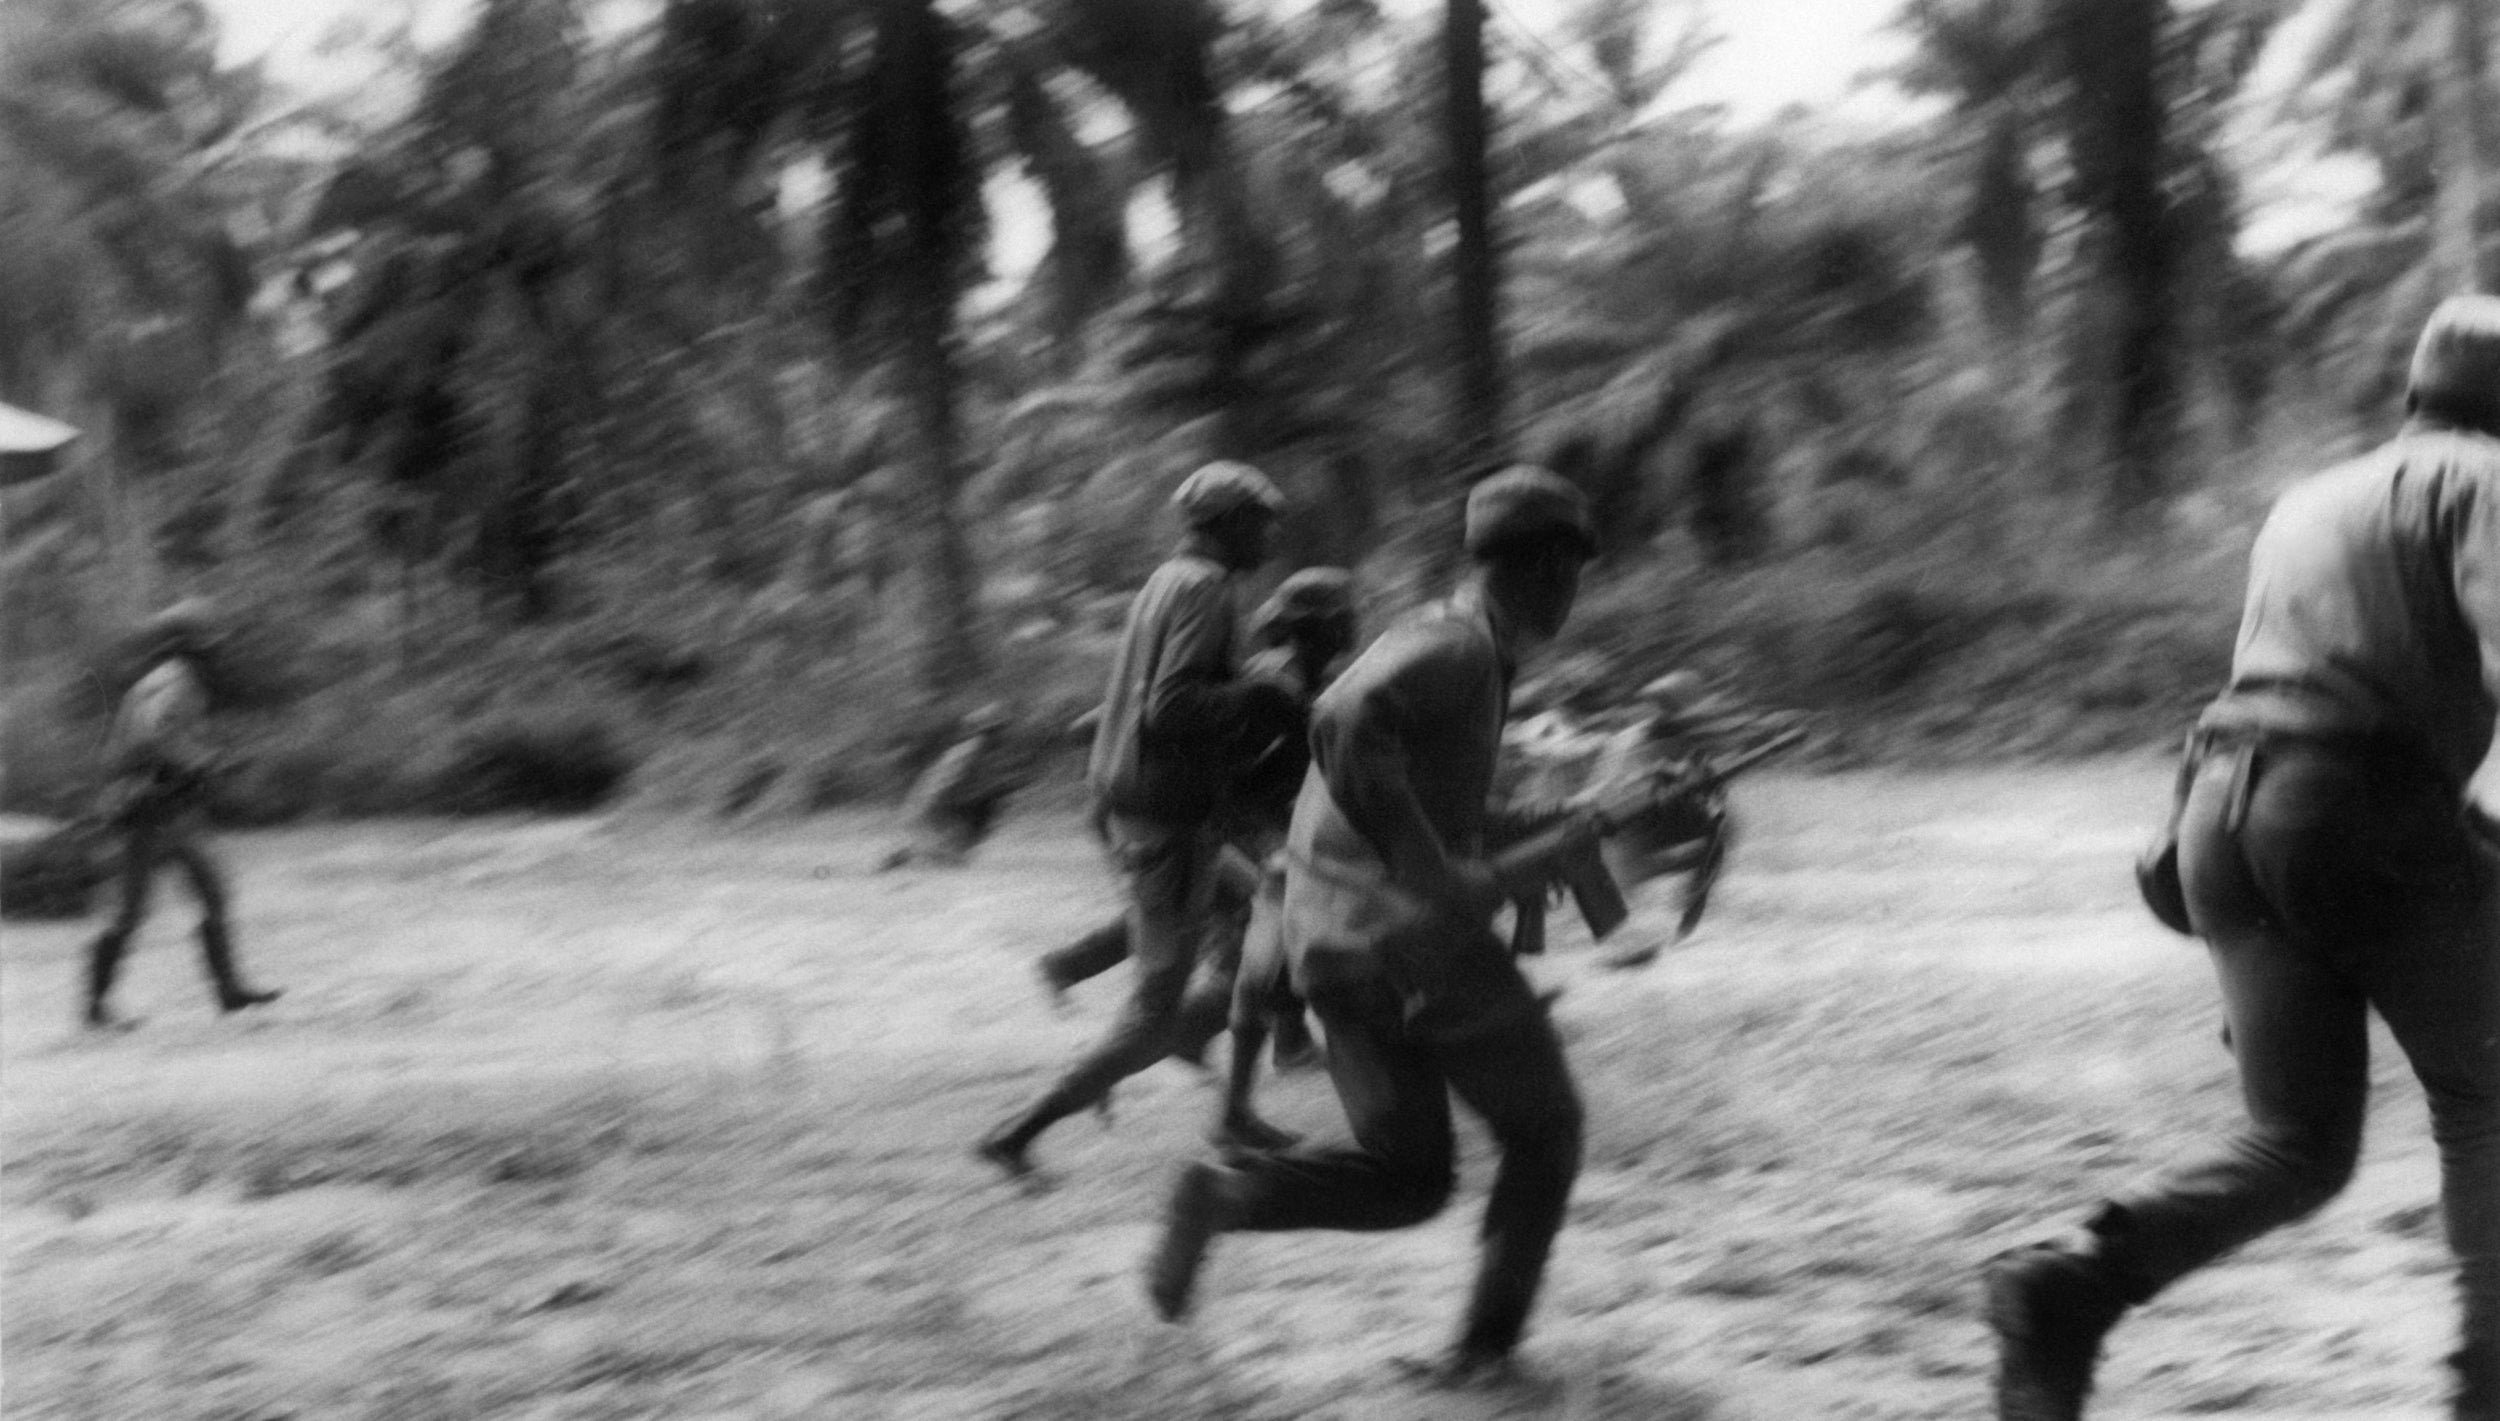 Biafran rebel soldiers during an attack to take the city of Ikot Ekpene from the Nigerian troops in 1968